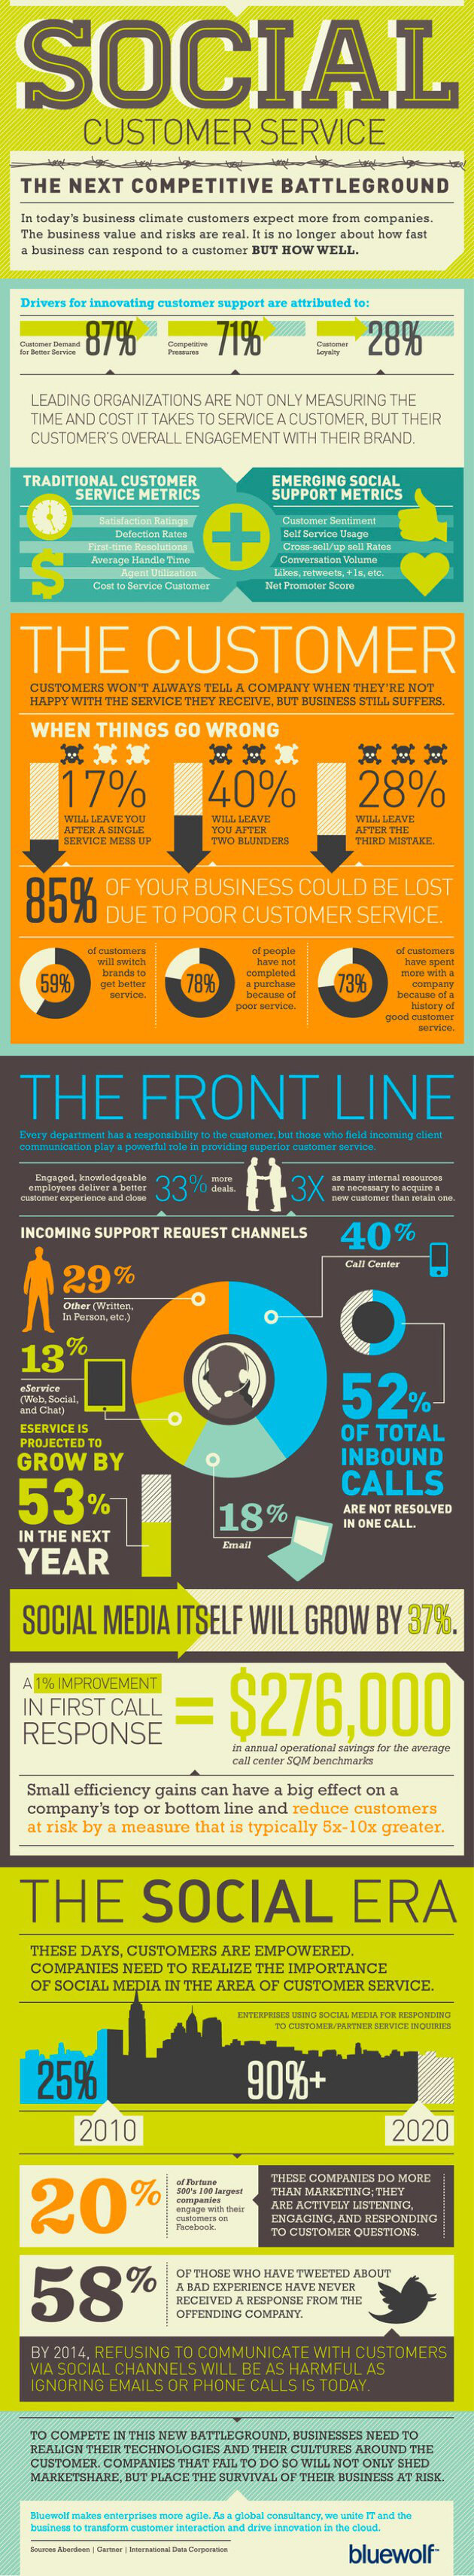 Social Customer Service infographic from bluewolf